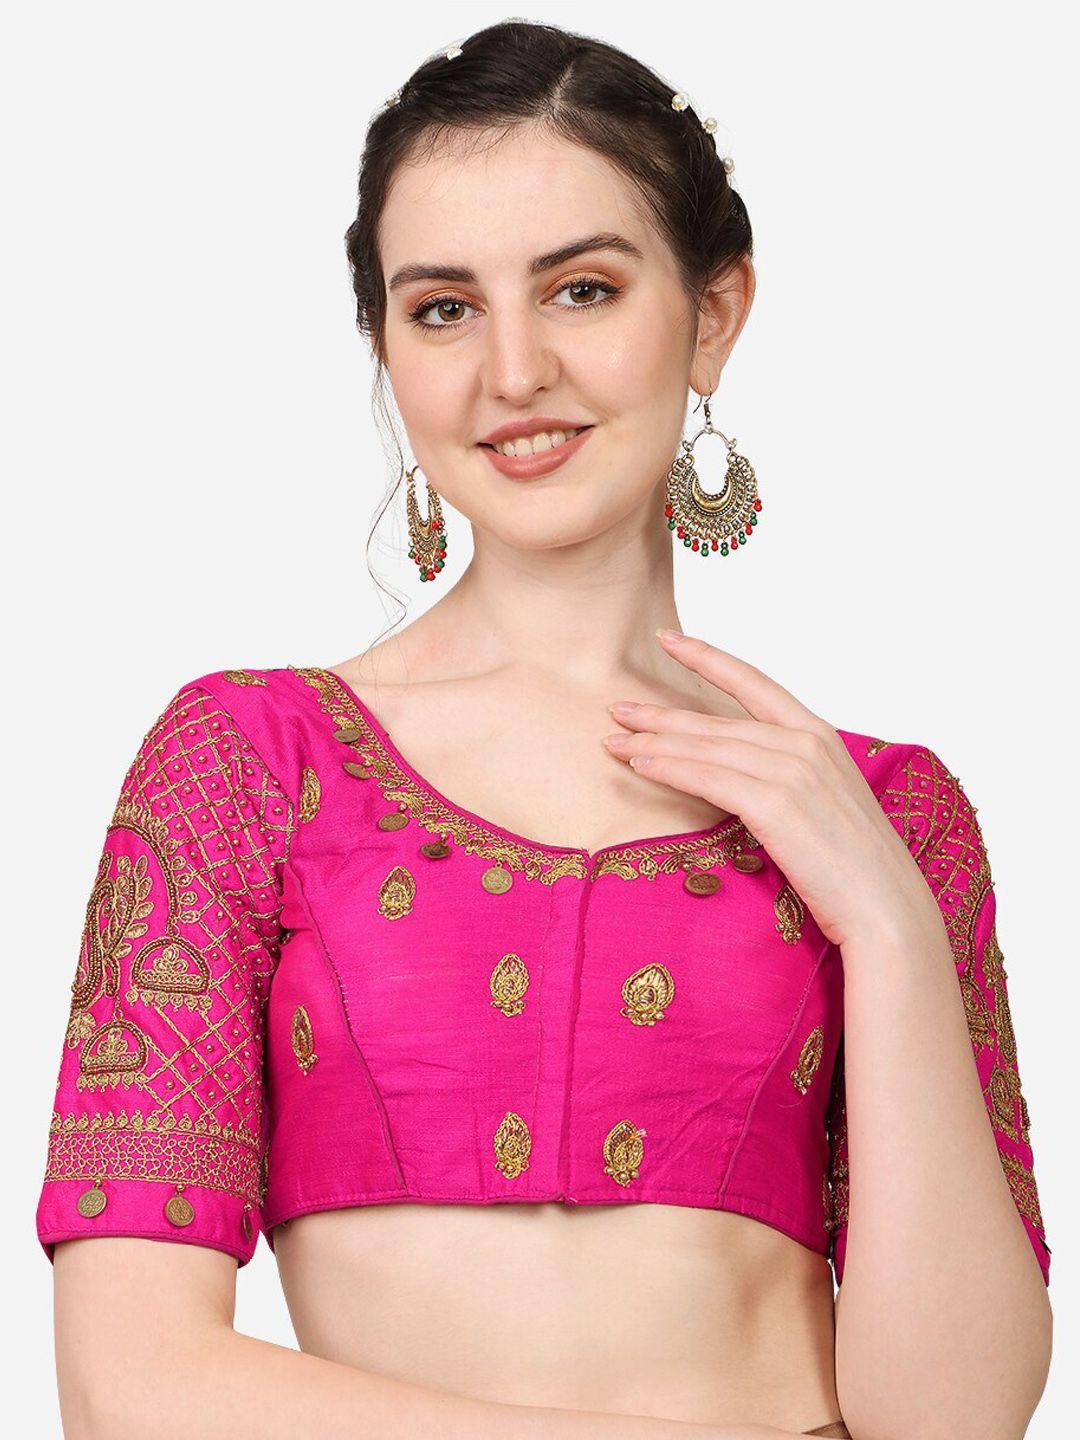 pujia-mills-women-pink-&-gold-embroidered-saree-blouse